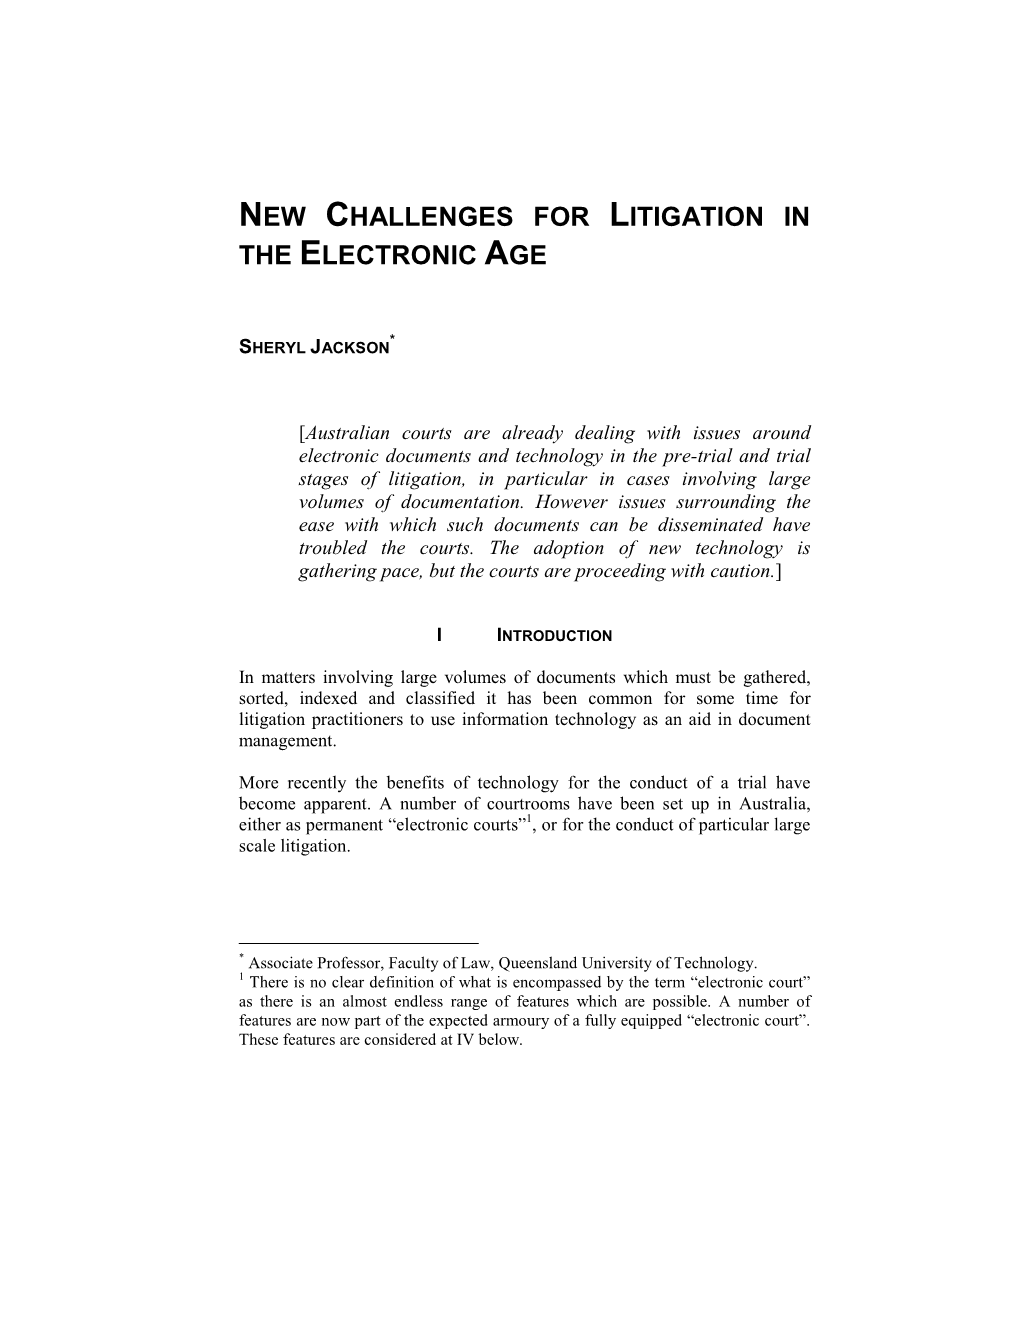 New Challenges for Litigation in the Electronic Age